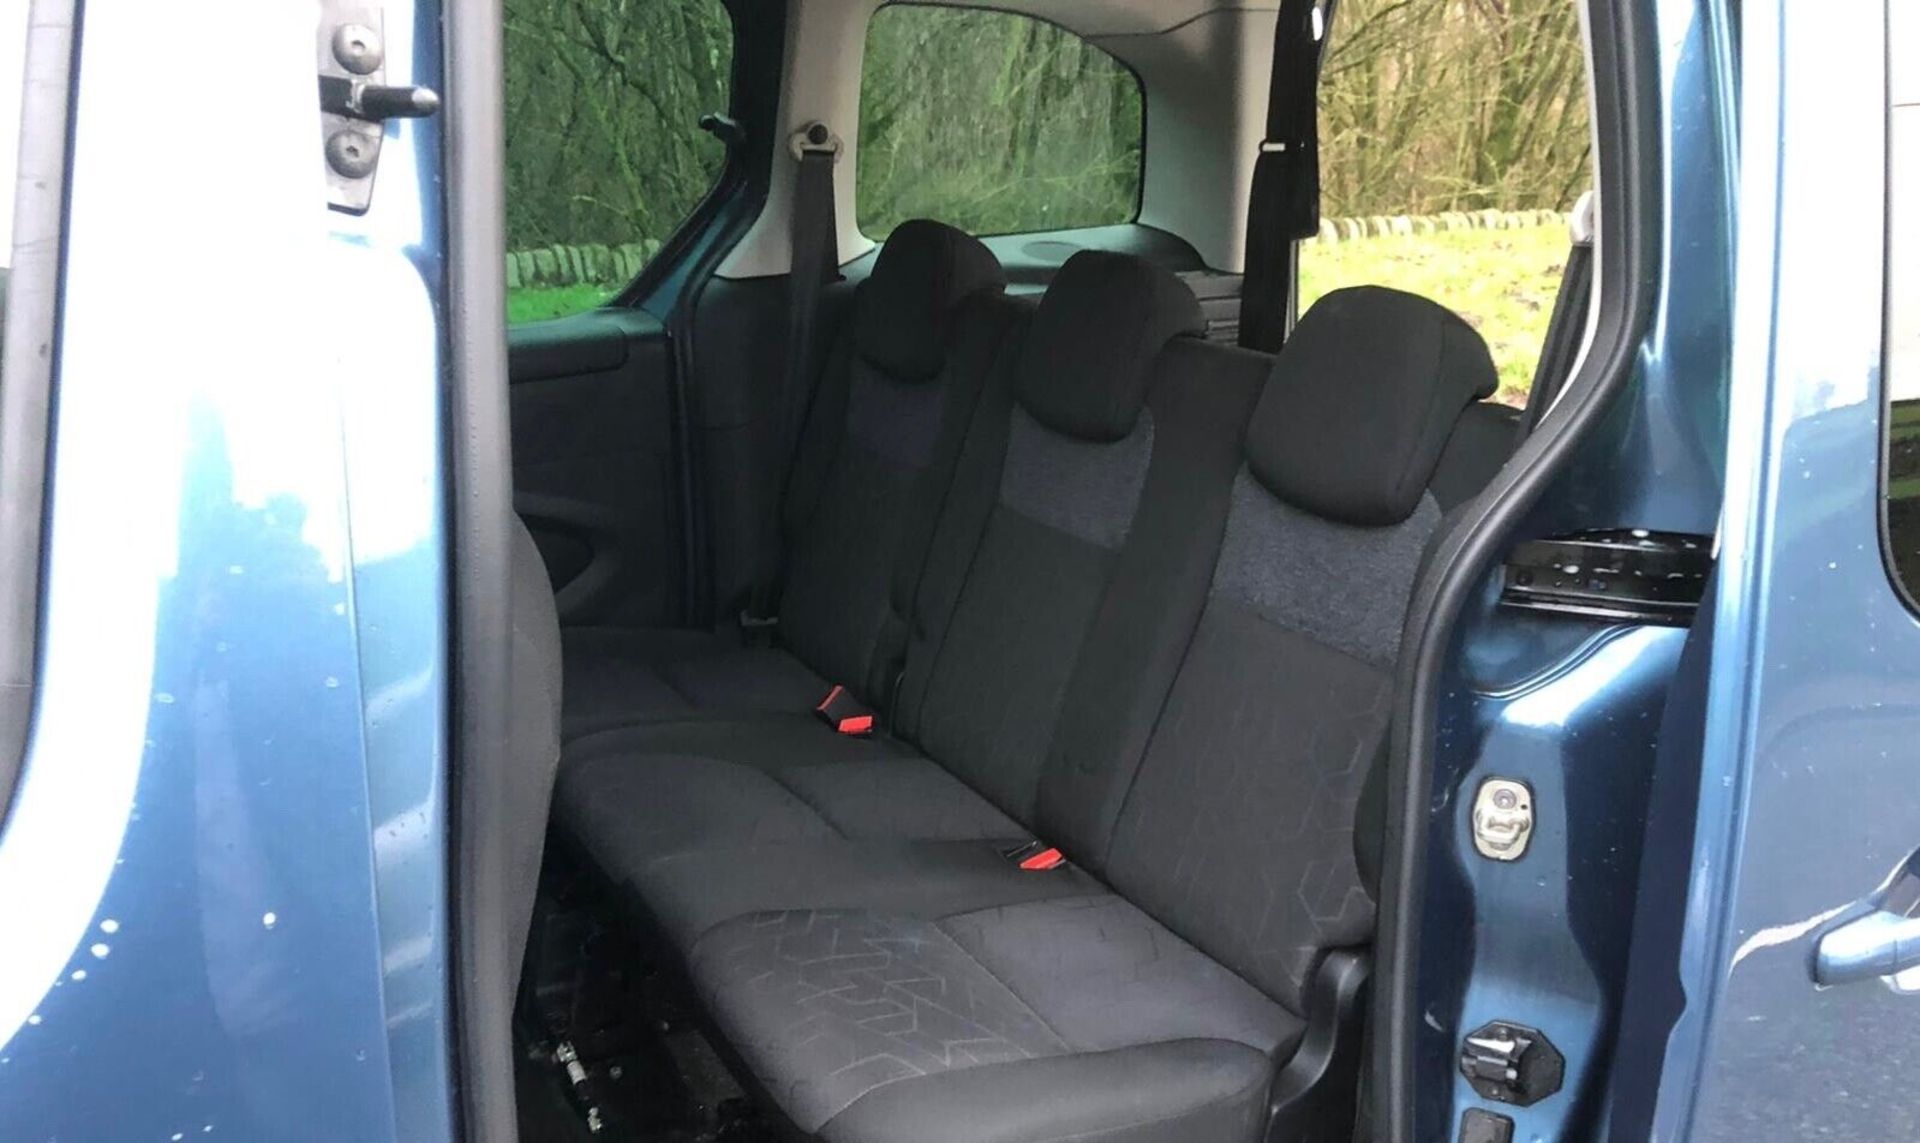 EXCEPTIONAL 2018/18 PEUGEOT PARTNER ACTIVE WHEELCHAIR ACCESSIBLE VEHICLE >>--NO VAT ON HAMMER--<< - Image 10 of 14